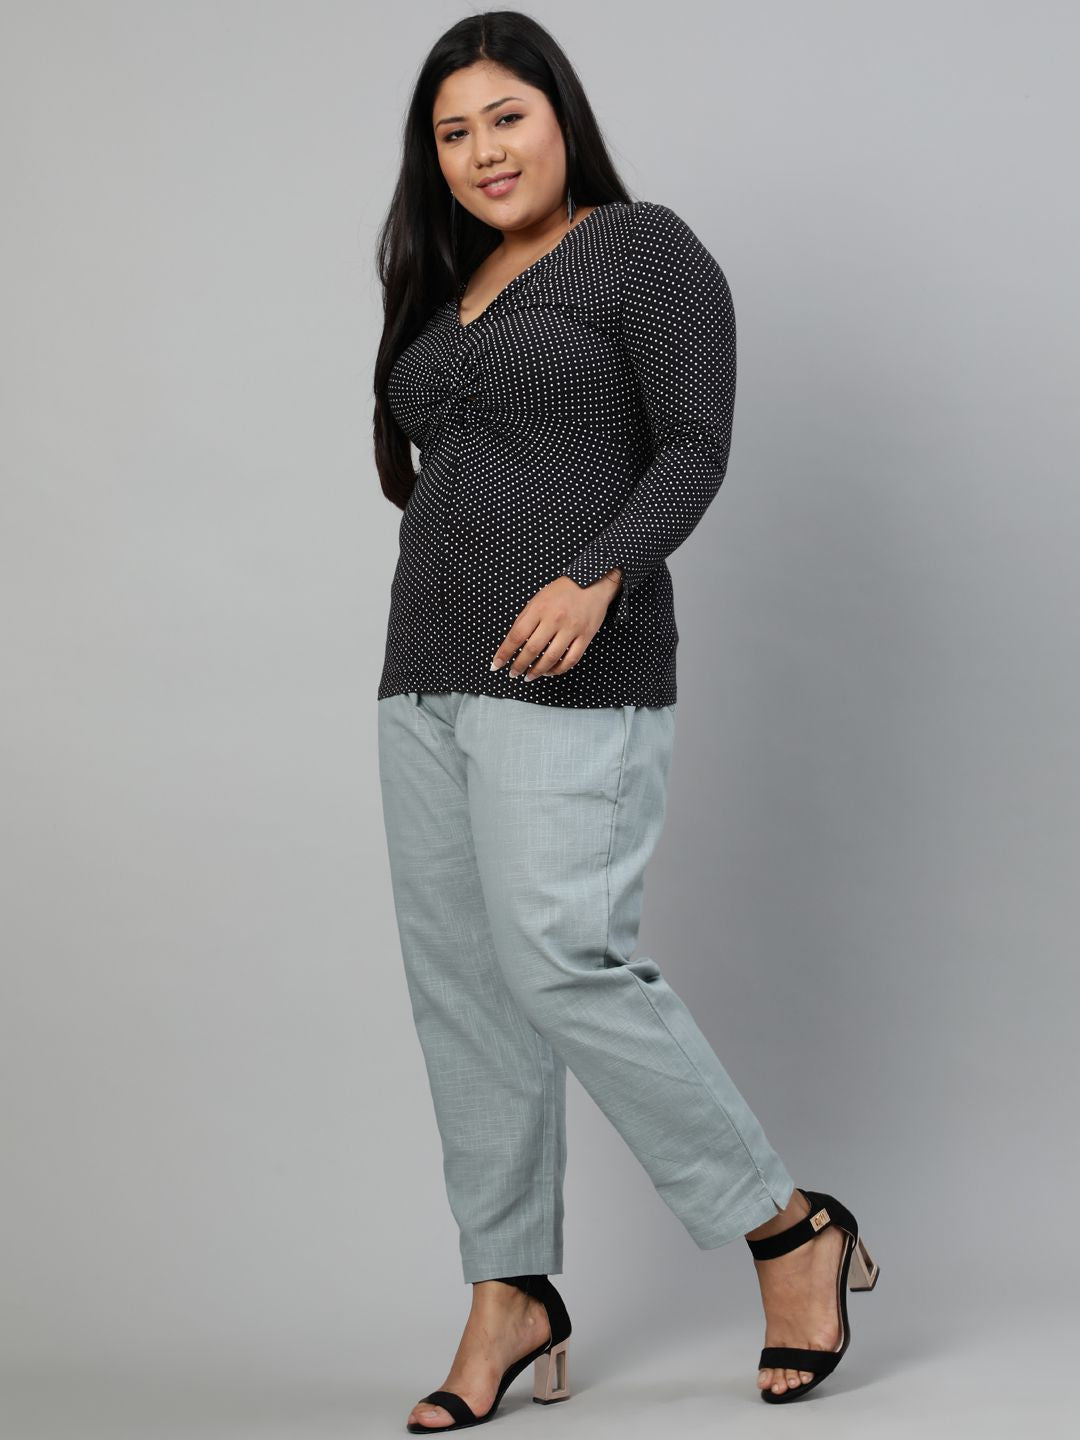 Get women's casual pants with elastic waist